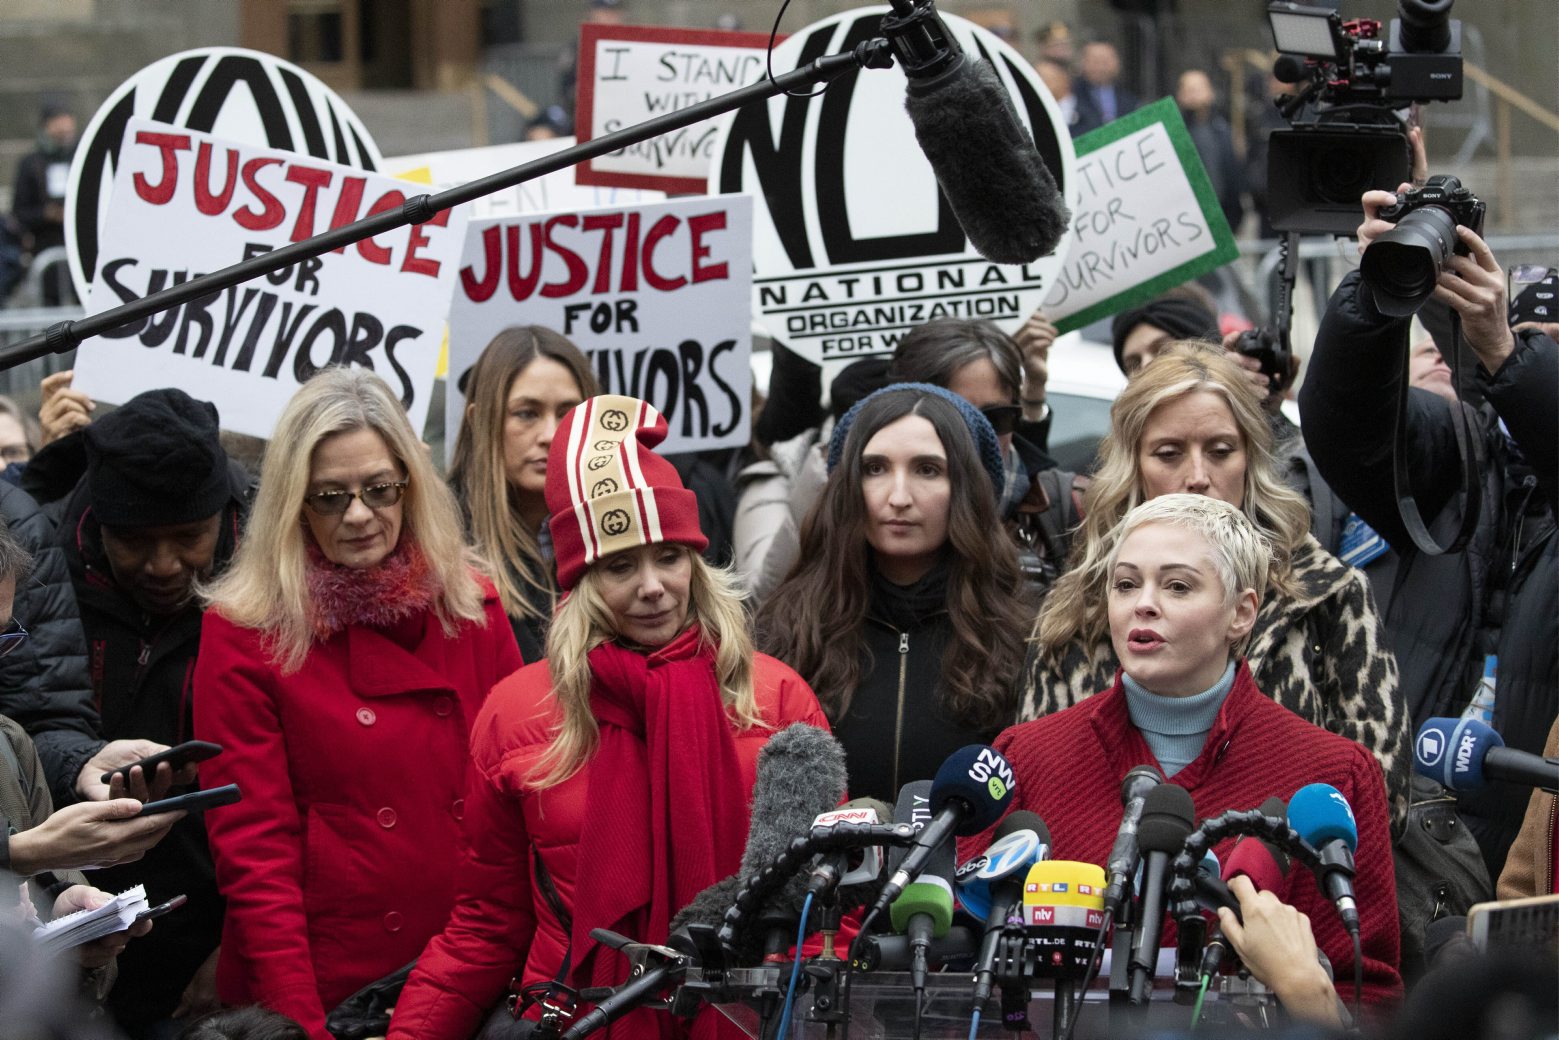 Actor Rose McGowan speaks at a news conference outside a Manhattan courthouse after the arrival of Harvey Weinstein, Monday, Jan. 6, 2020, in New York. Weinstein is on trial on charges of rape and sexual assault, more than two years after a torrent of women began accusing him of misconduct. (AP Photo/Mark Lennihan) Sexual Misconduct Weinstein